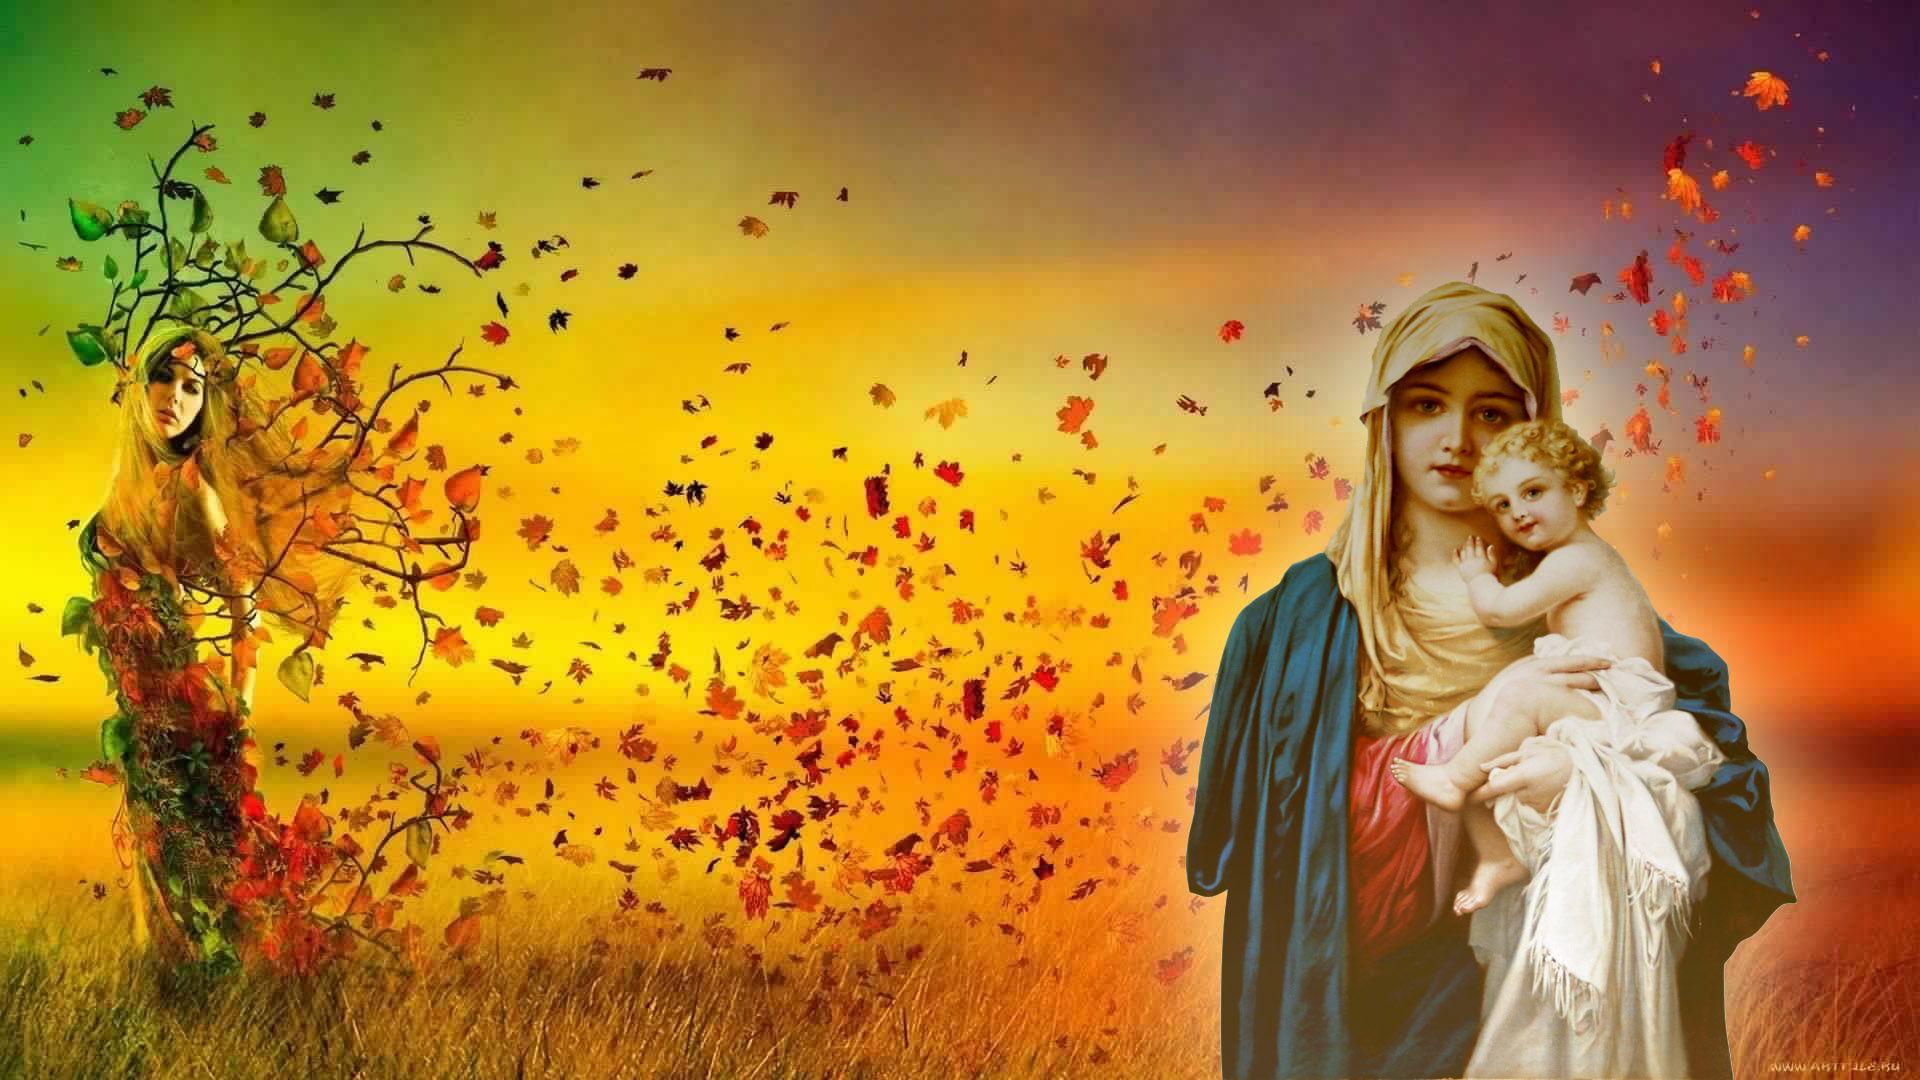 Mother Mary With Baby Jesus HD Wallpaper. Mother mary image